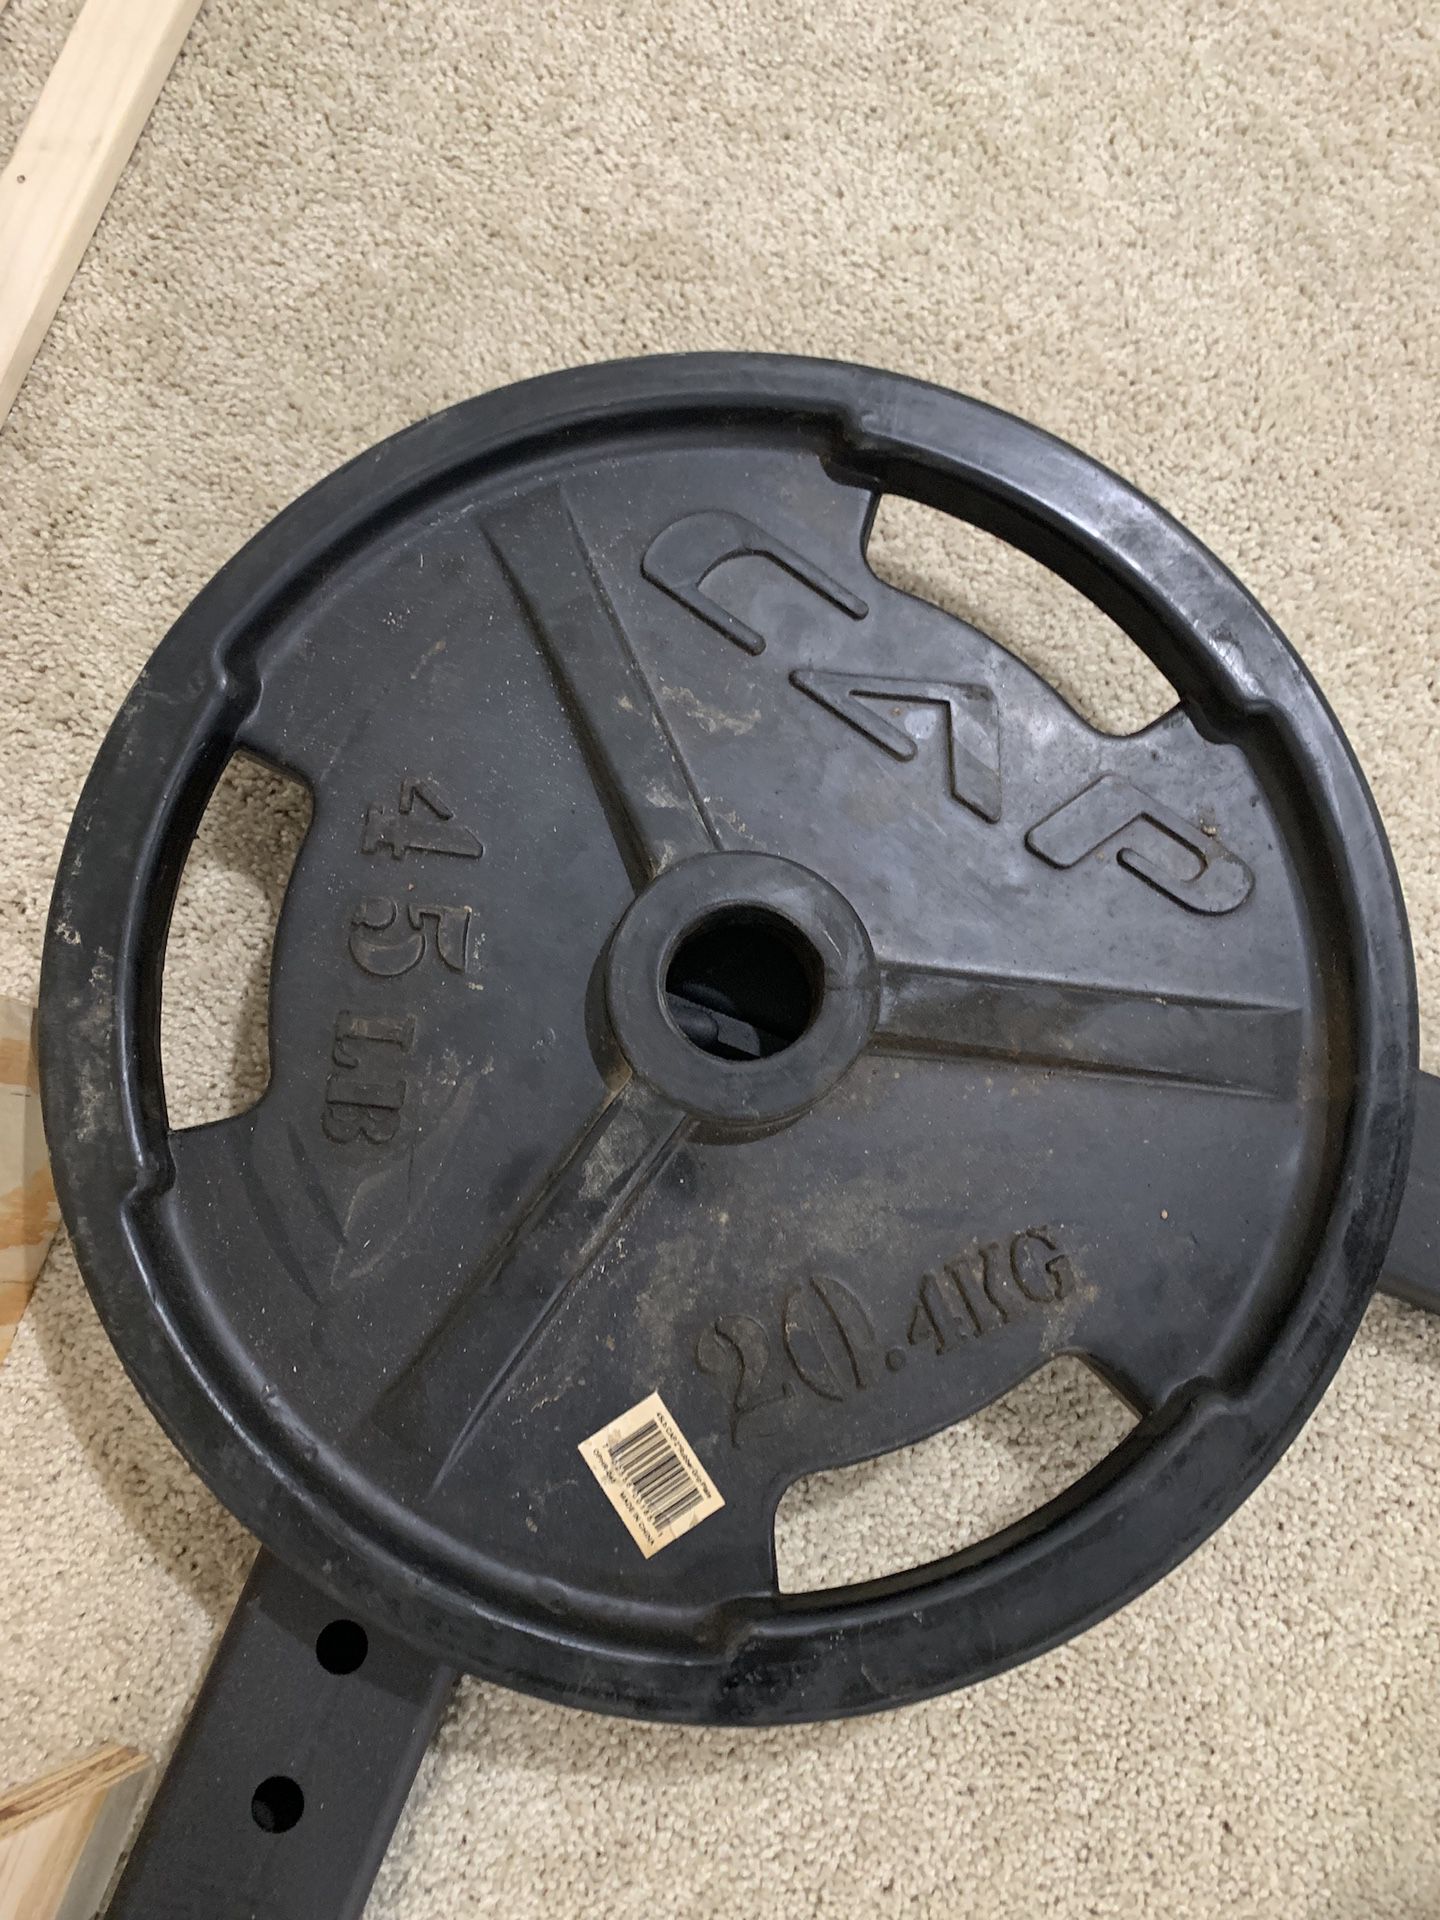 Set of 45 Pound weight 2 inch plates